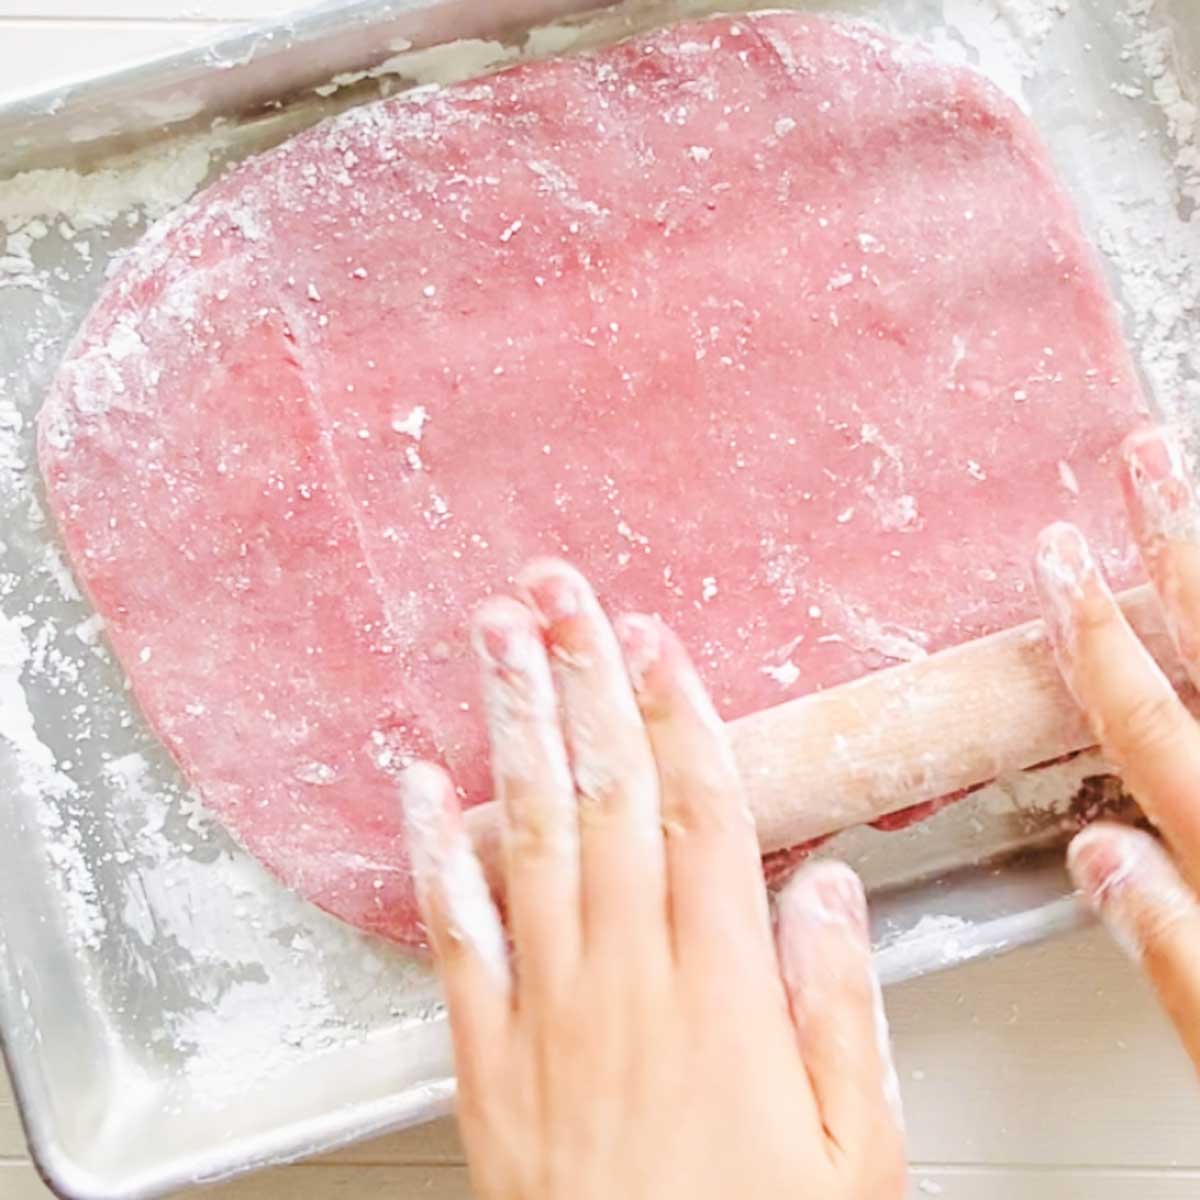 How to Make Healthy Strawberry Mochi (Made in the Microwave) - strawberry mochi